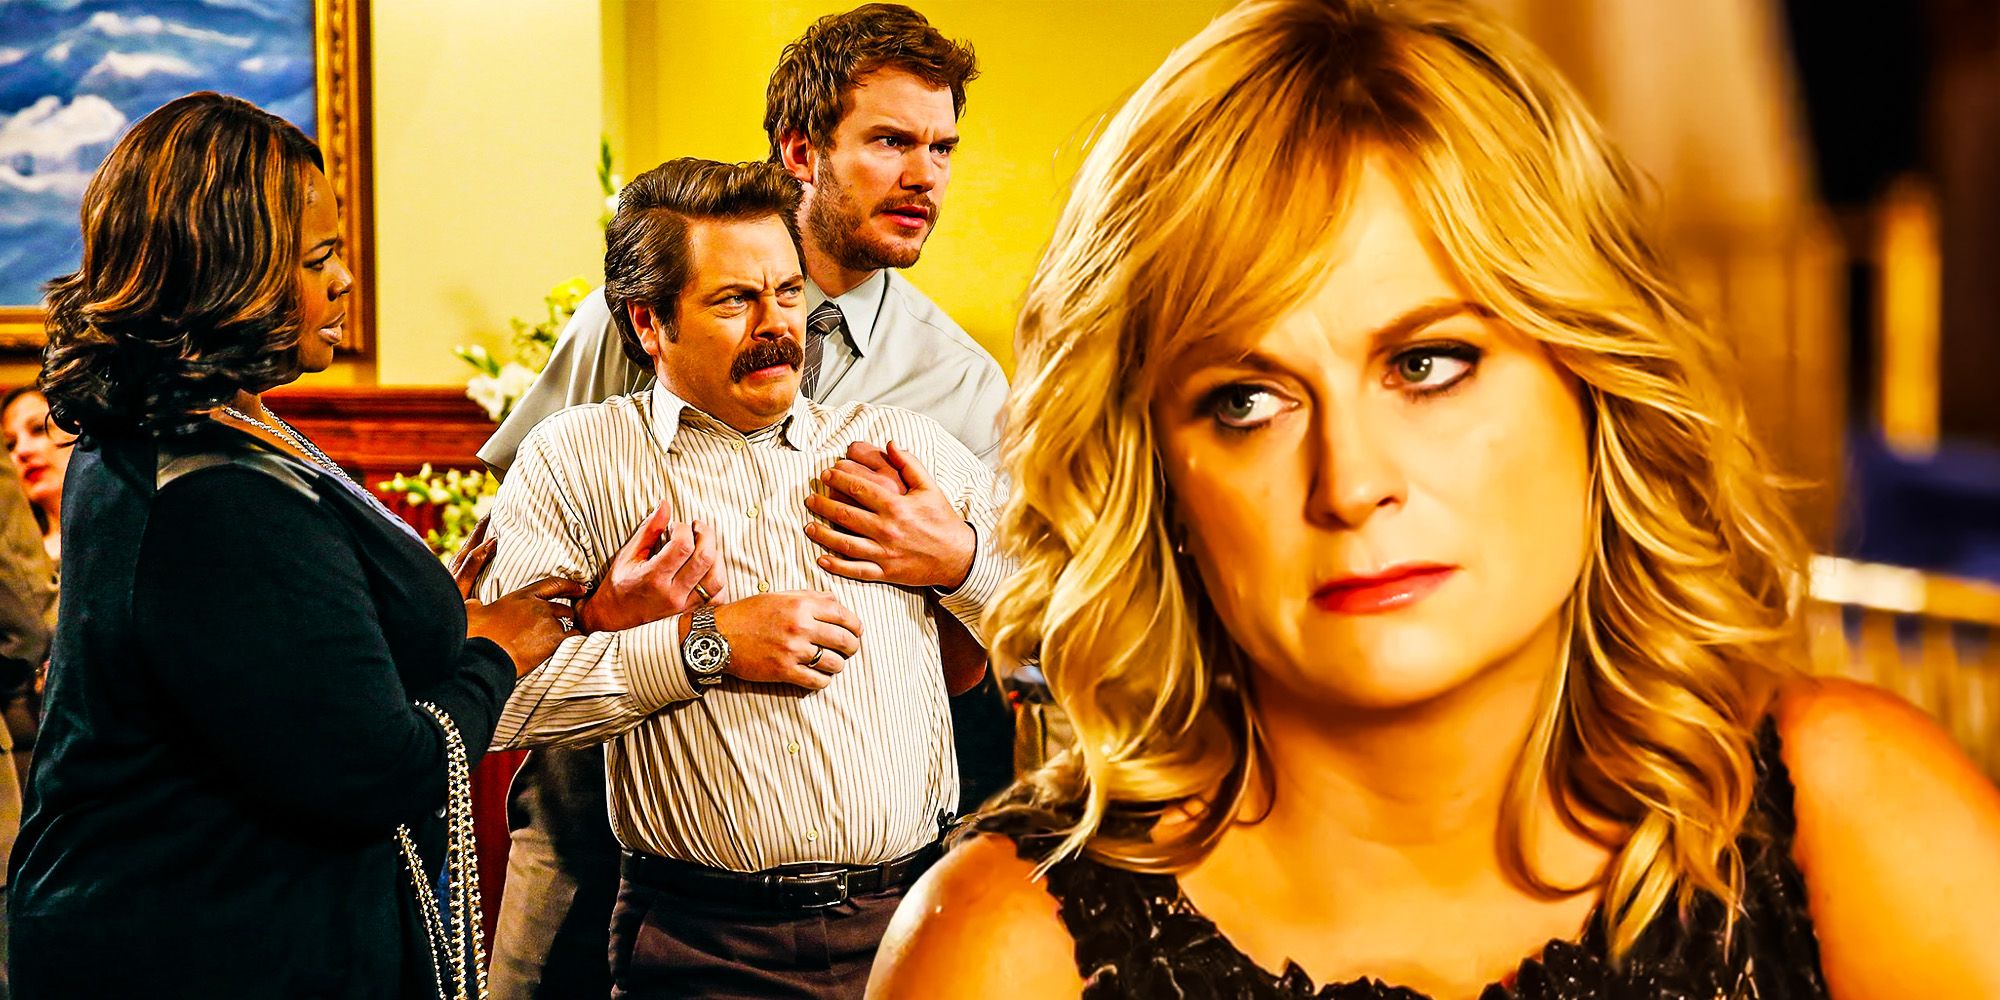 parks and recreation season 7 nearly ruined the show forver leslie knope amy poehler ron swanson nick offerman